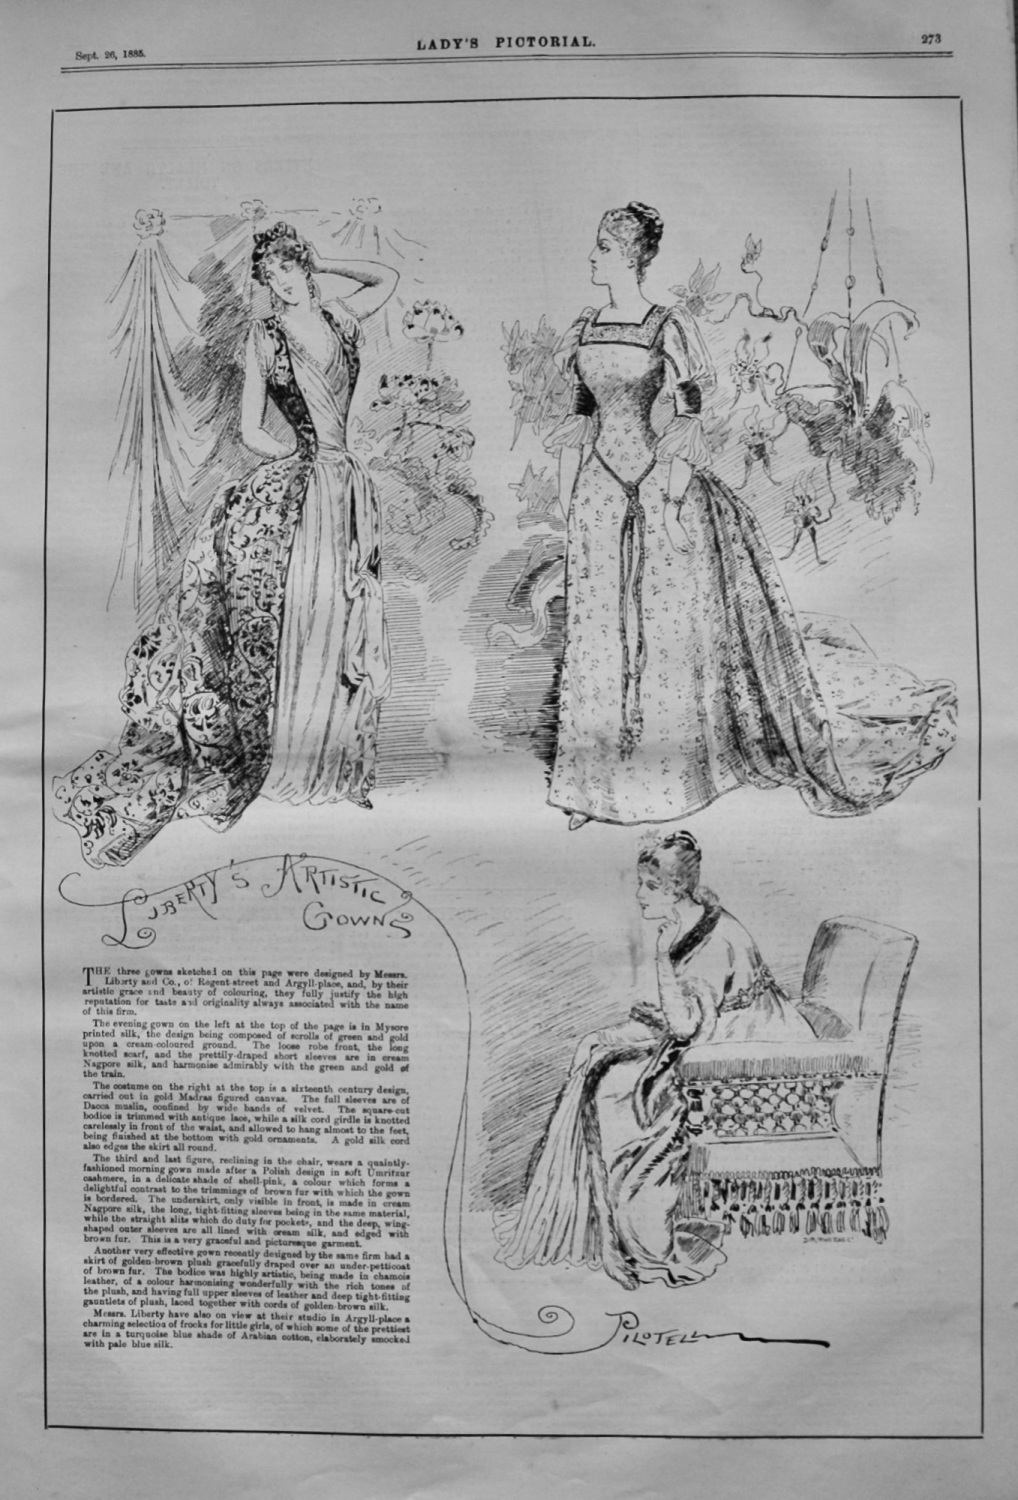 Liberty's Artistic Gowns.  1885.